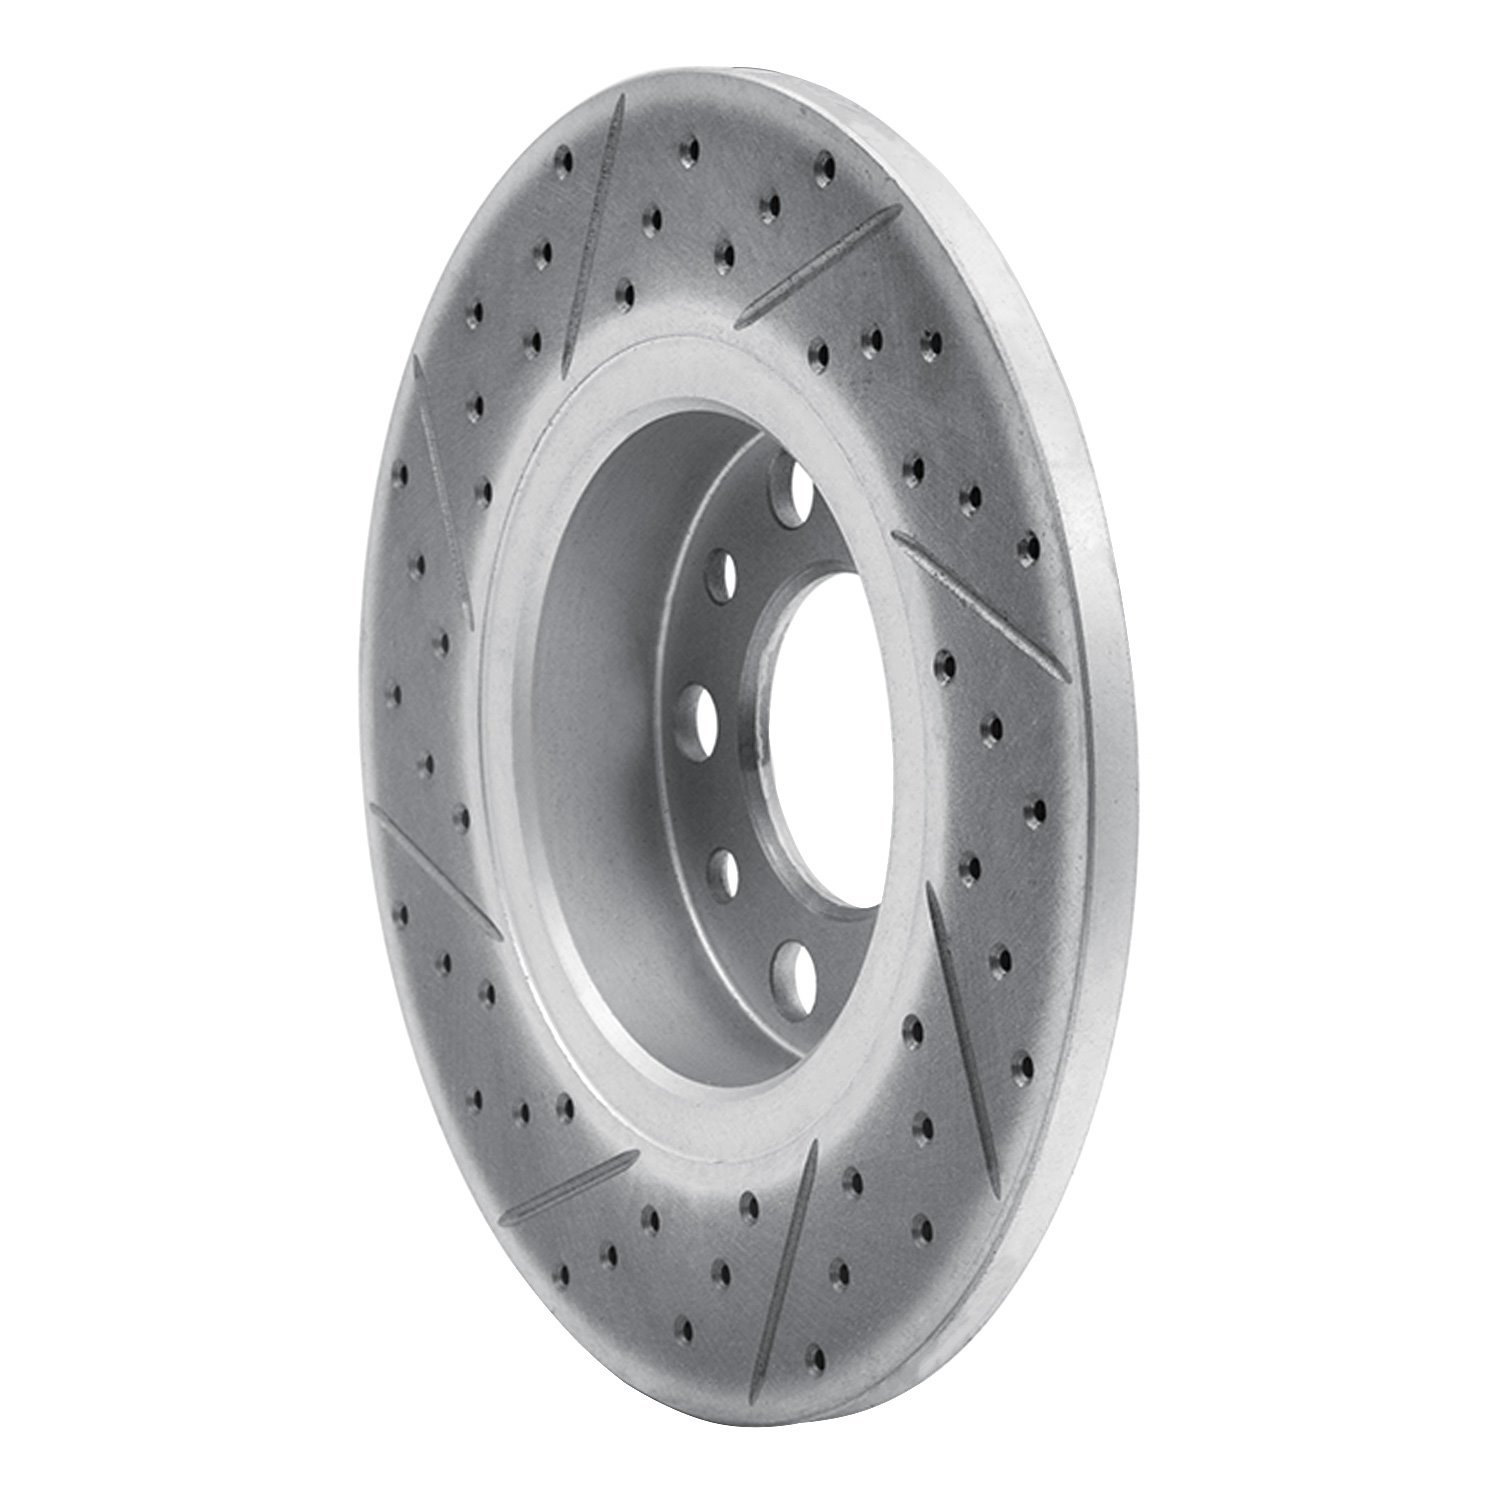 830-42014R Geoperformance Drilled/Slotted Brake Rotor, Fits Select Mopar, Position: Rear Right